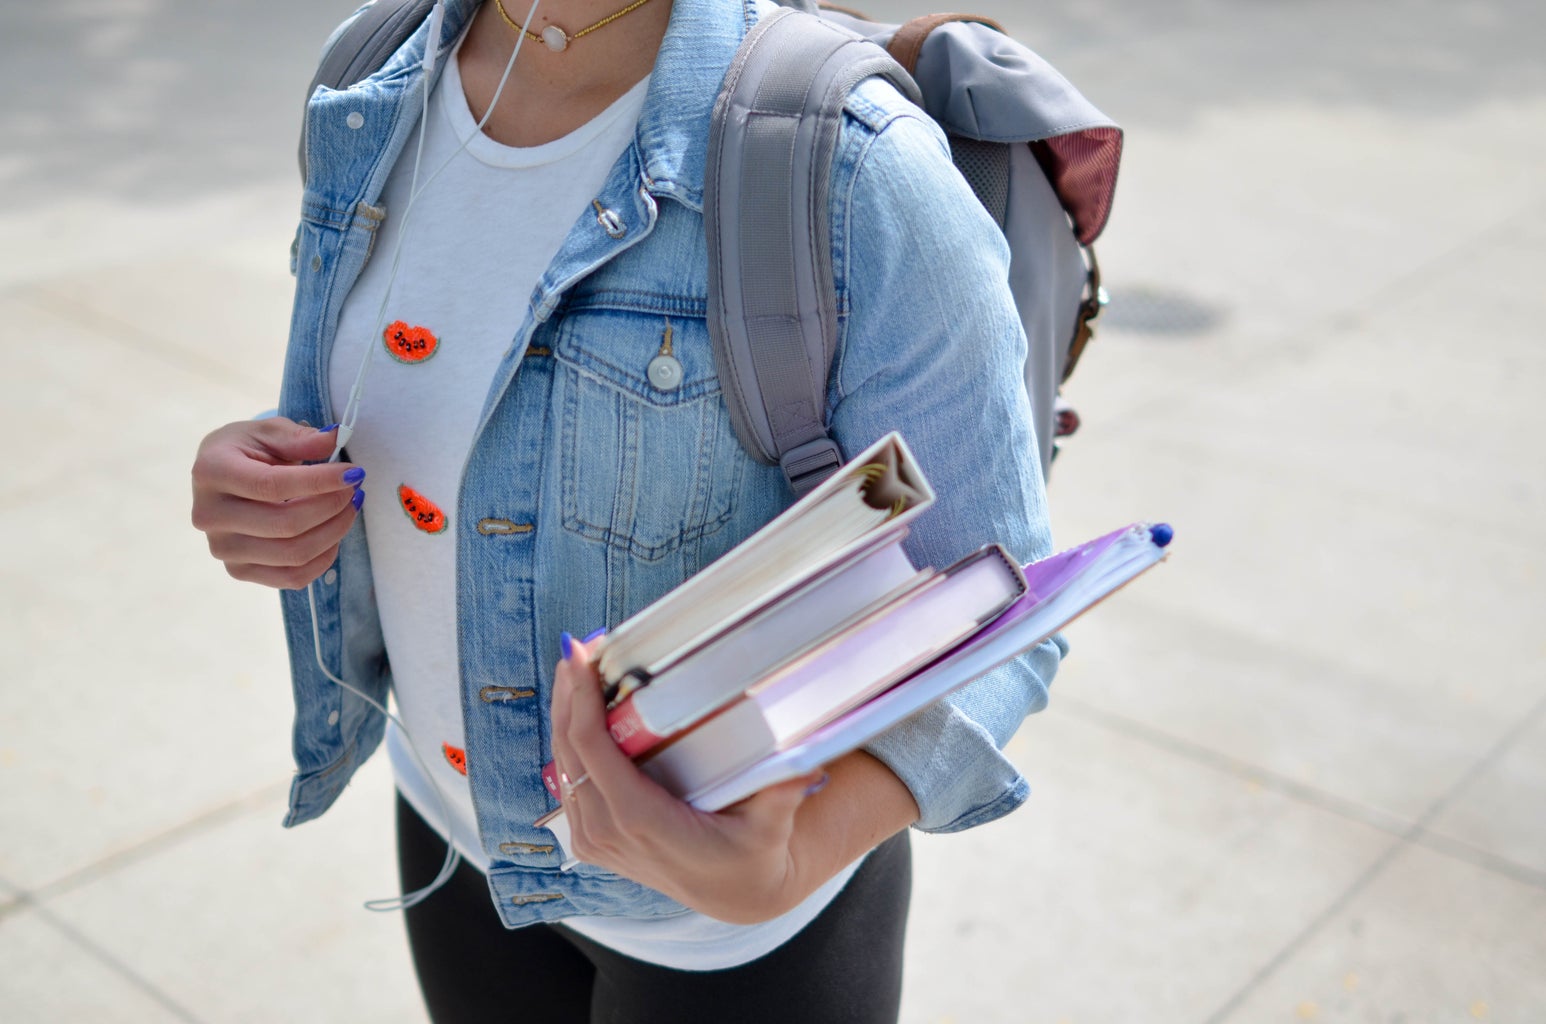 Student listens to music, with books in hand and a denim jacket